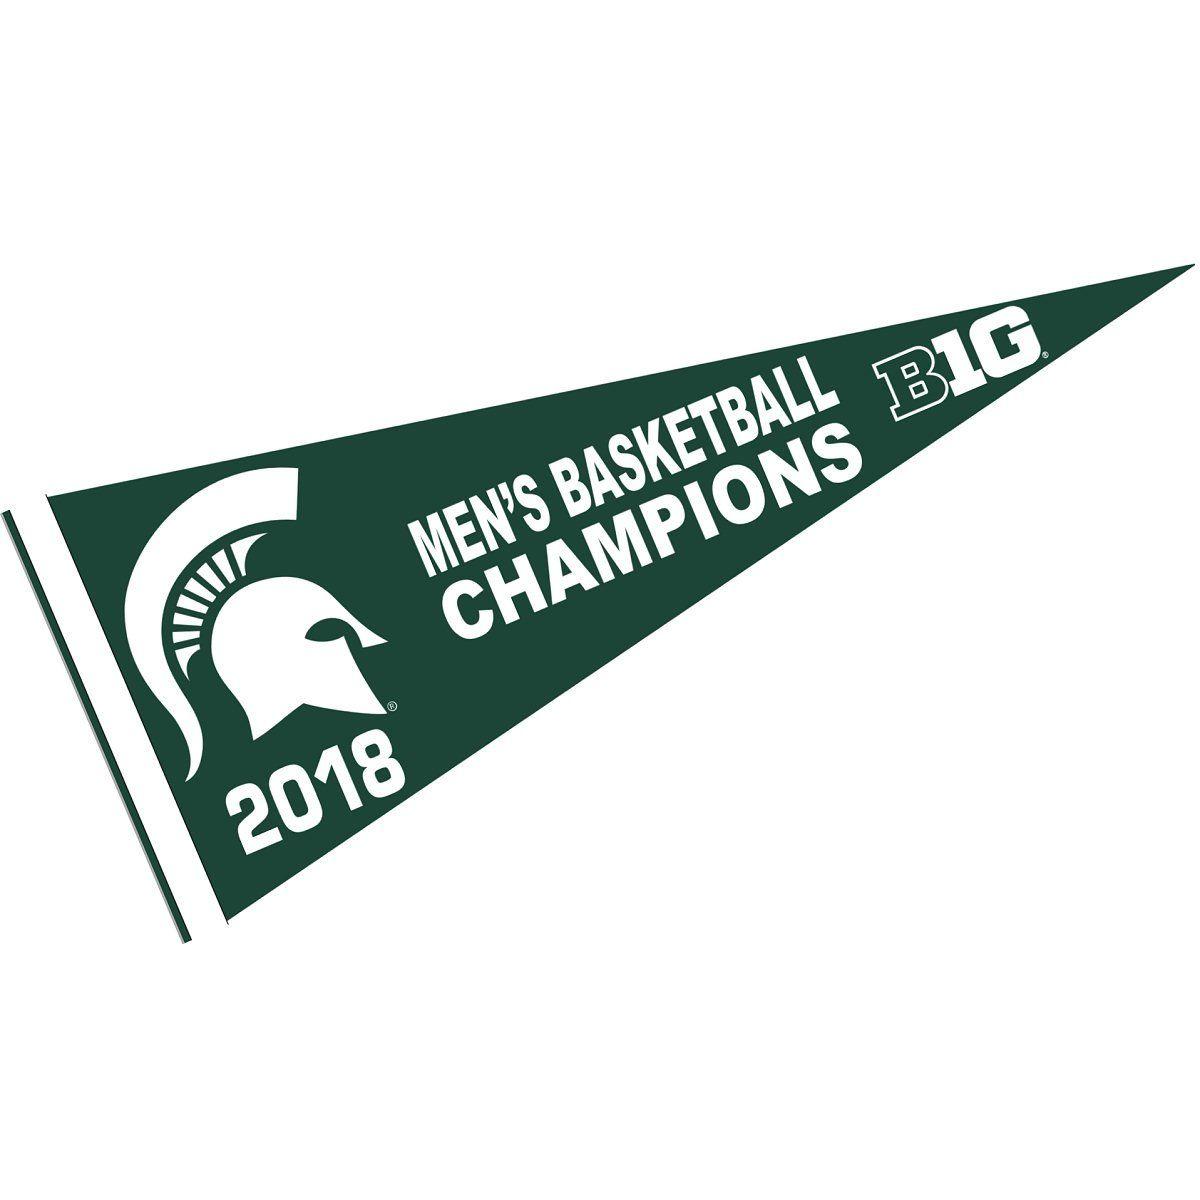 Basketball Big 10 Logo - Amazon.com : College Flags and Banners Co. Michigan State Spartans ...